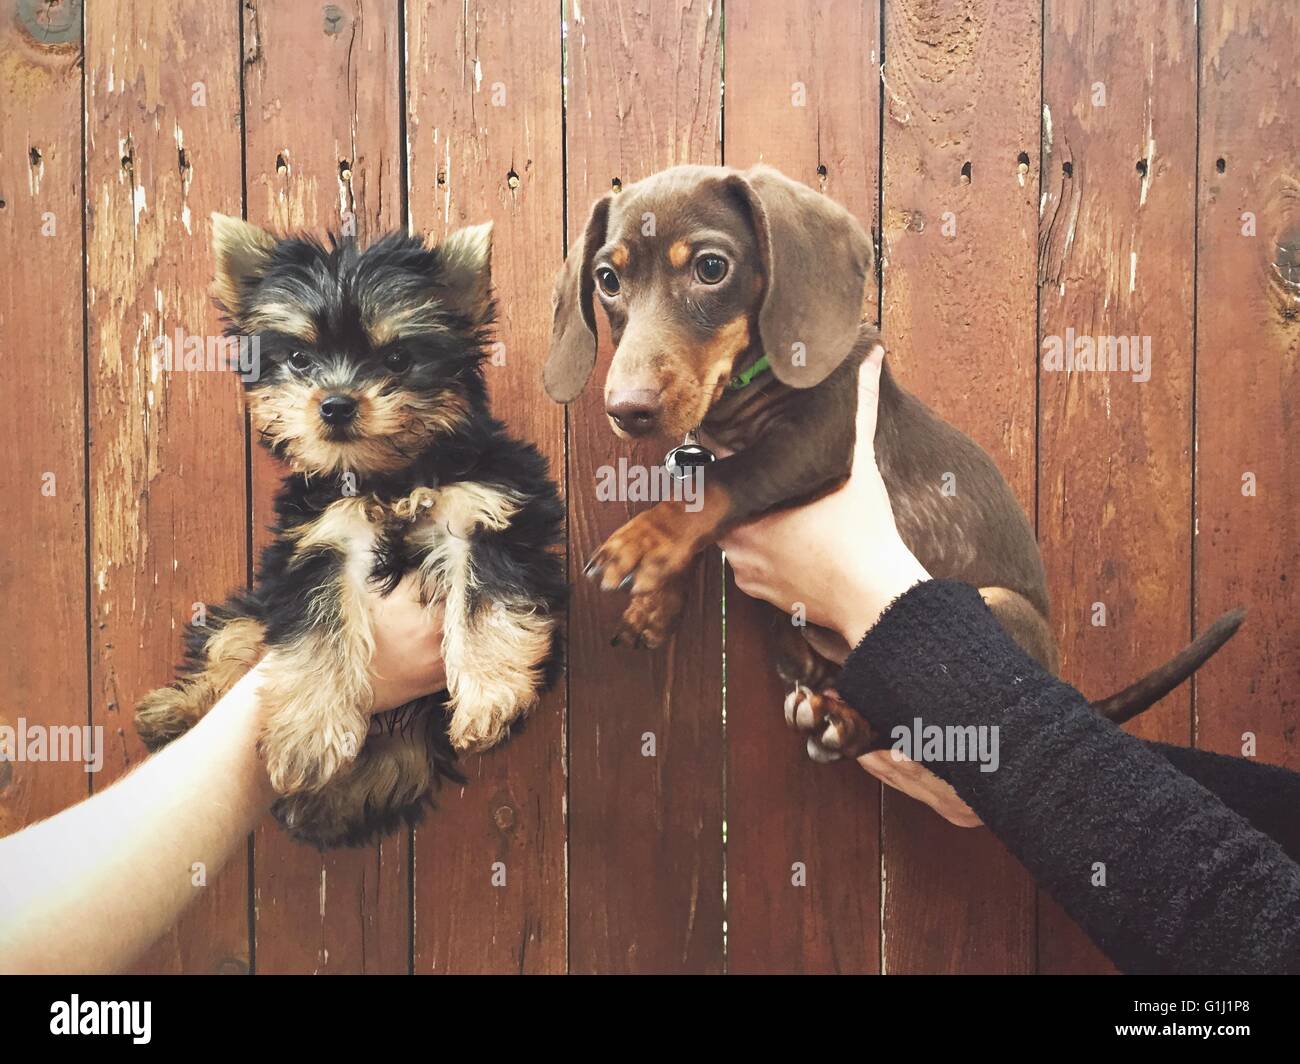 Human hands holding two puppies Stock Photo